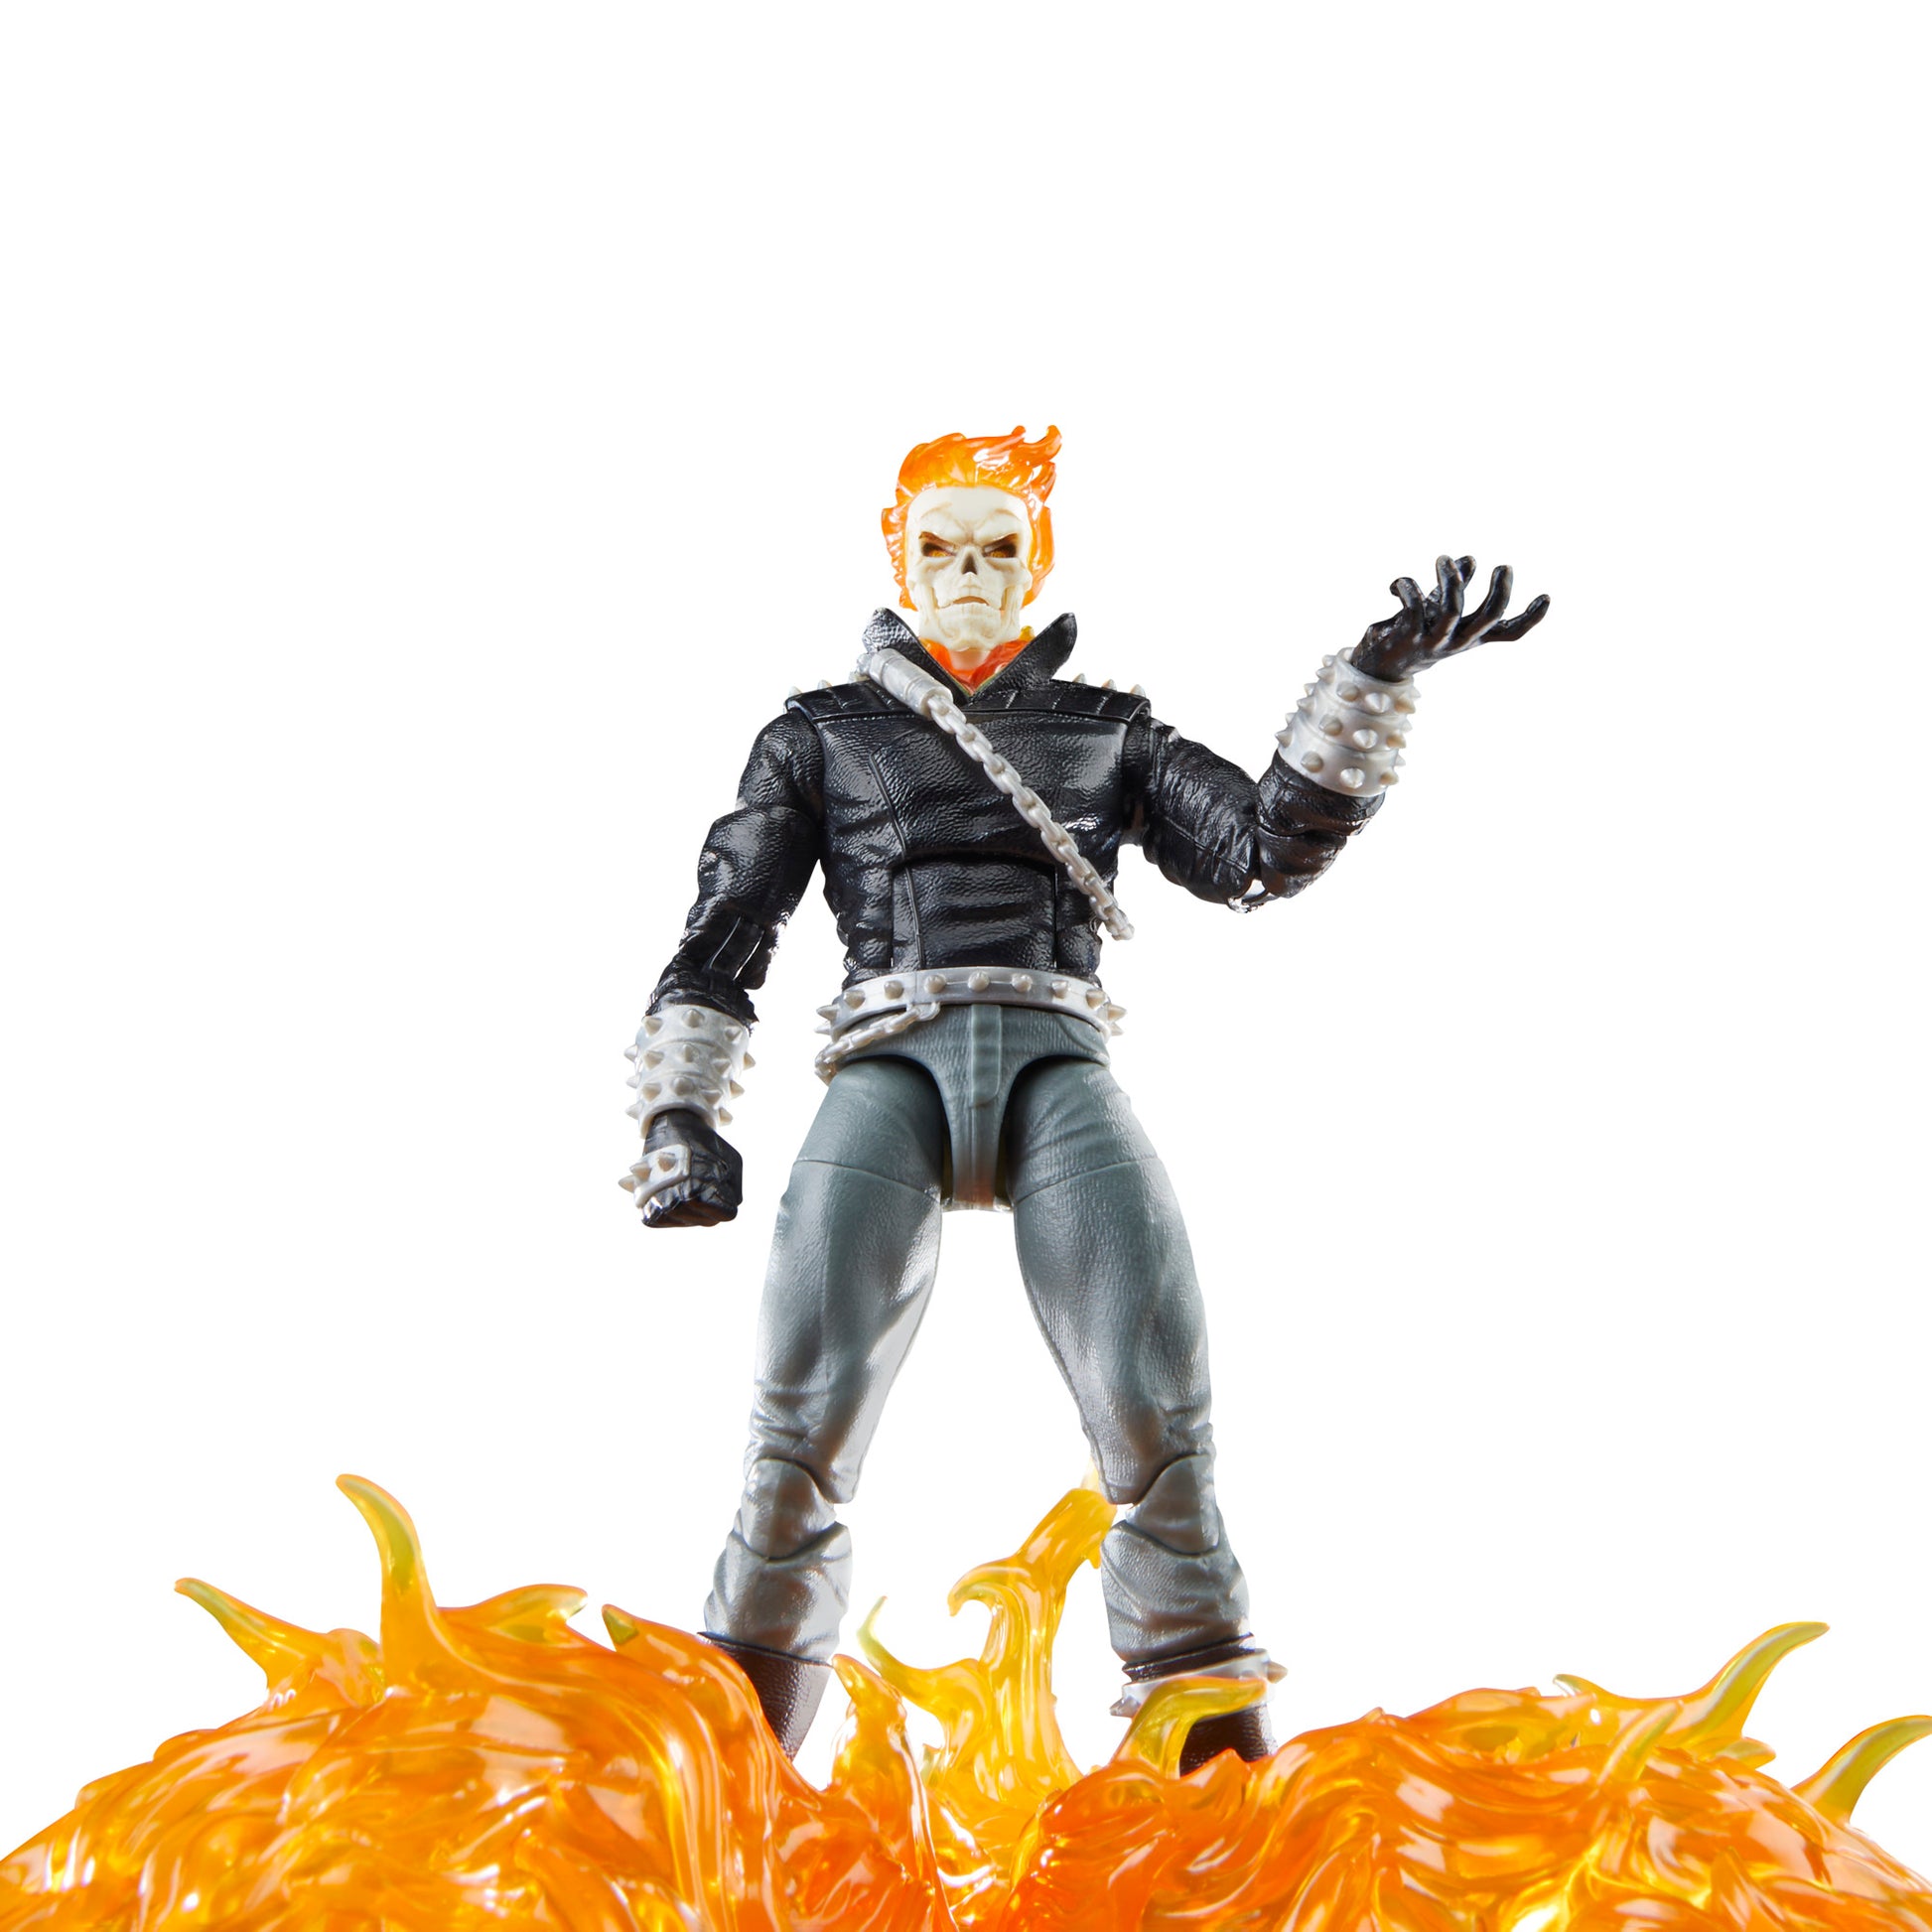 Marvel Legends Series Ghost Rider, 6" Comics Collectible Action Figure with Motorcycle